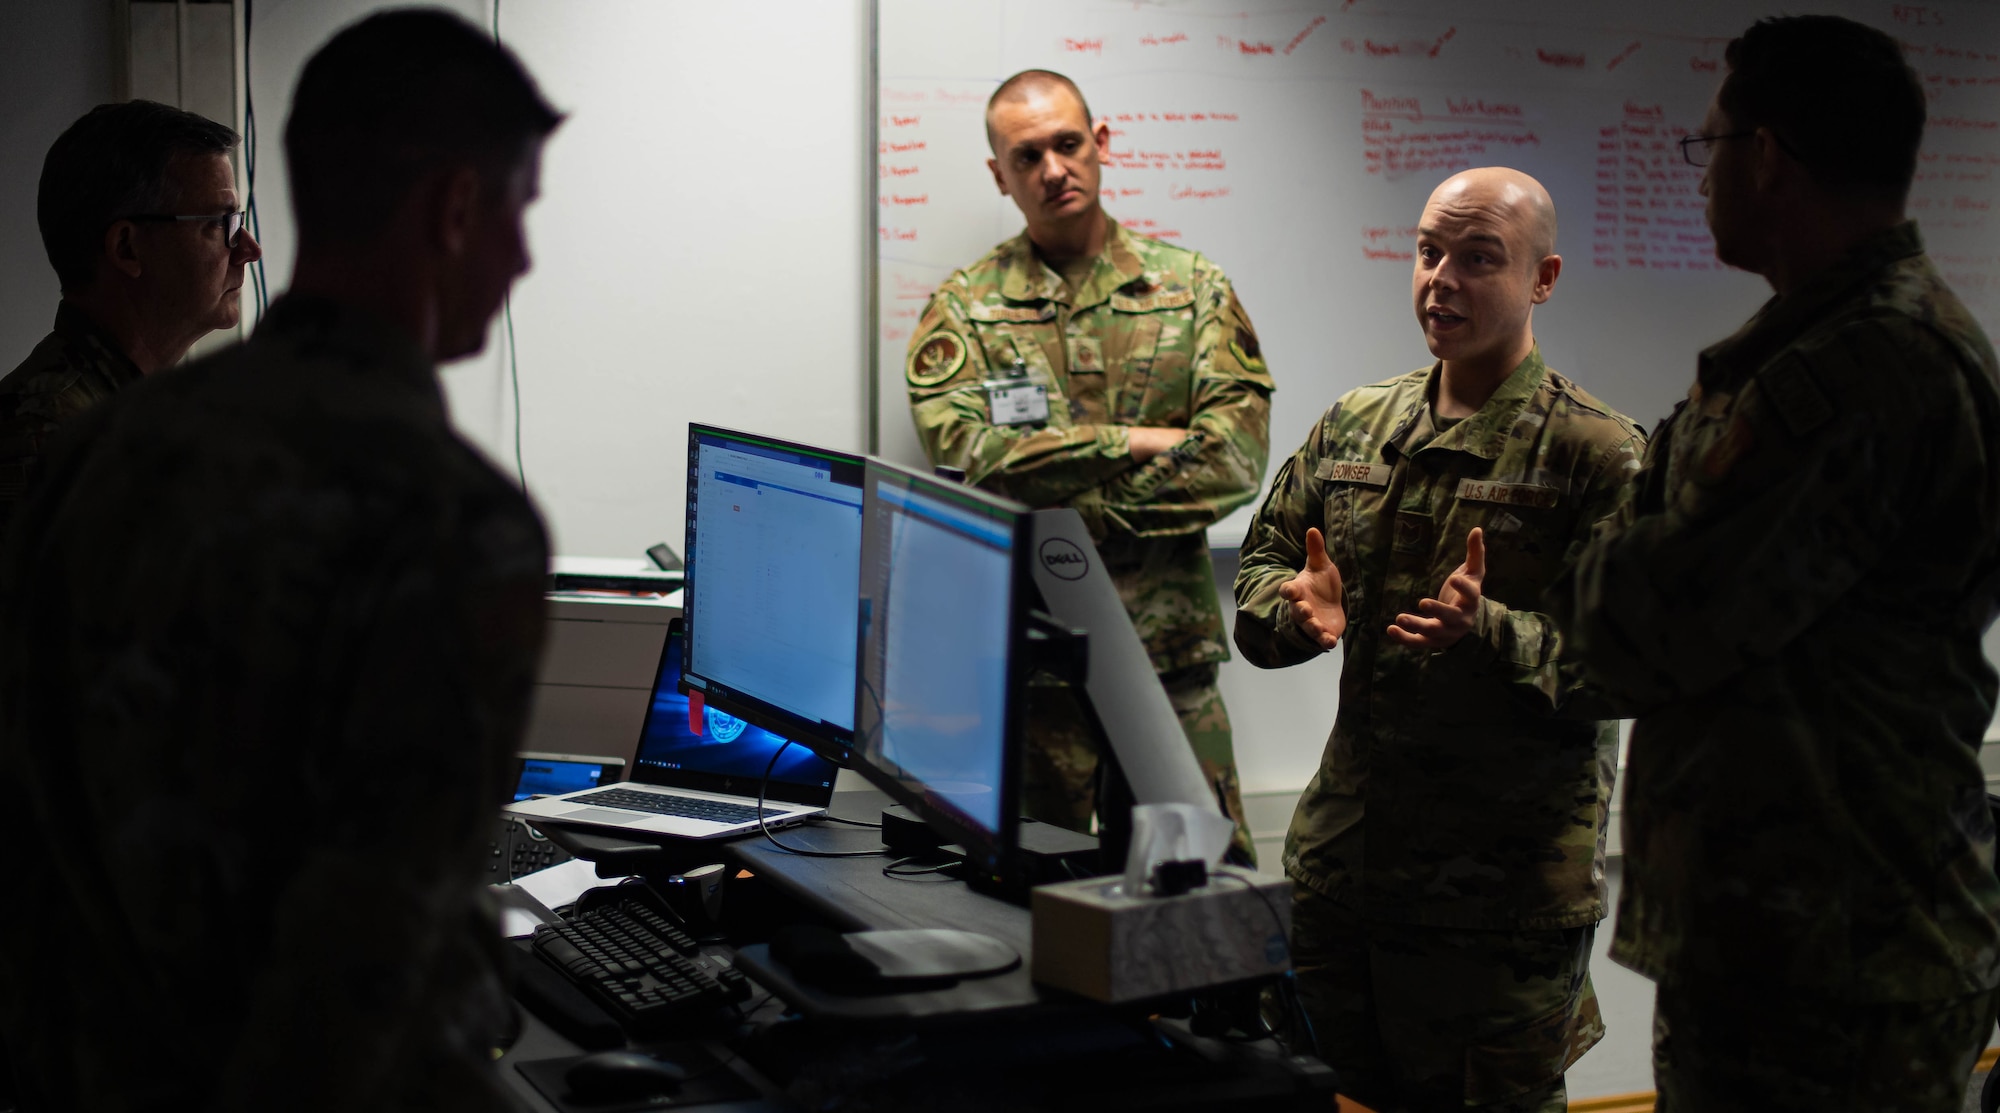 U.S. Air Force Tech. Sgt. Daniel Bowser, 1st Combat Communications Squadron mission defense team section chief assigned to Ramstein Air Base, Germany, discusses the integrity of data with other participants of Tacet Venari during the exercise at Ramstein Air Base, May 19, 2022. Tacet Venari is United States Air Forces in Europe – Air Forces Africa’s two-week long premiere defensive cyberspace operational training targeted at USAFE’s mission defense team. The hands-on experience the exercise provides prepares Airmen for real-world cyber threat scenarios. (U.S. Air Force photo by Airman 1st Class Jared Lovett)